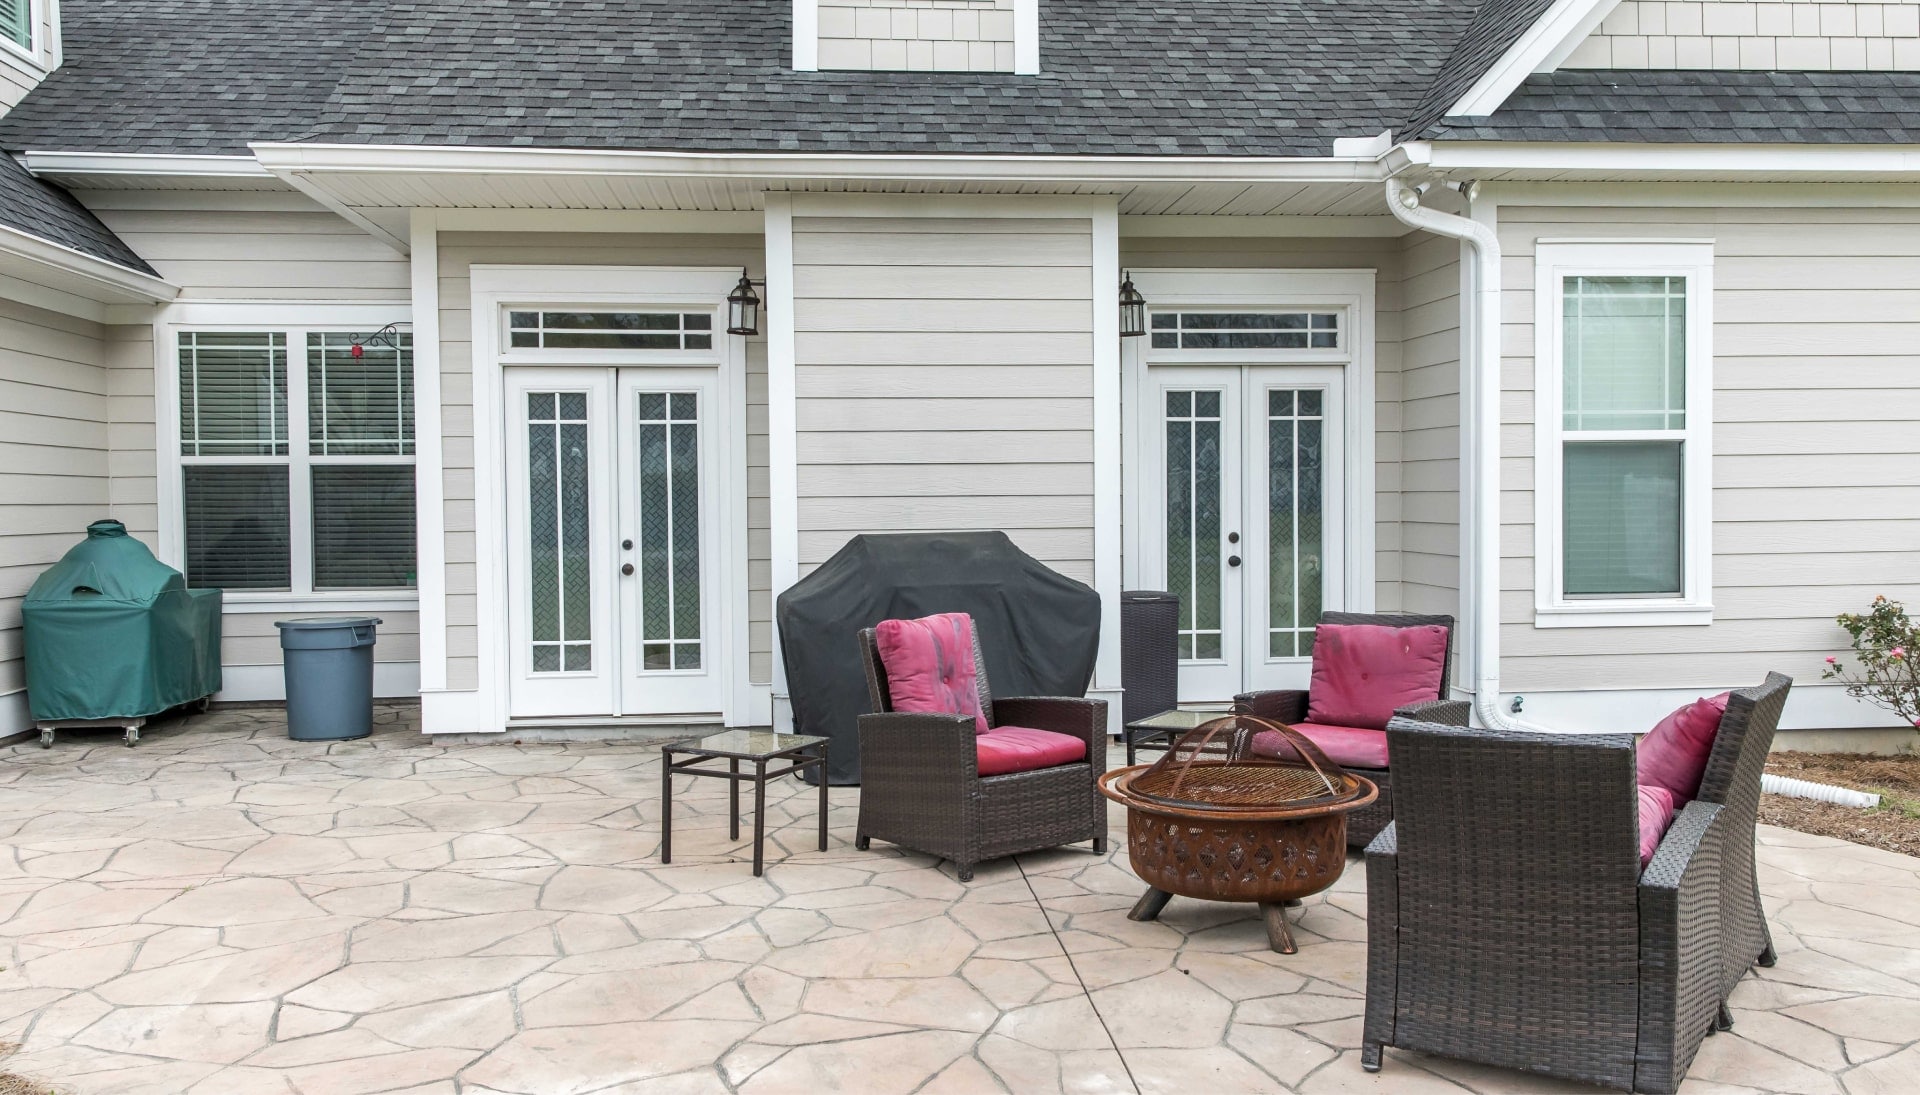 Elevate Your Outdoor Living Space with Stunning Stamped Concrete Patio in Arlington, TX - Choose from a Variety of Creative Patterns and Colors to Achieve a Unique and Eye-Catching Look for Your Patio with Long-Lasting Durability and Low-Maintenance.